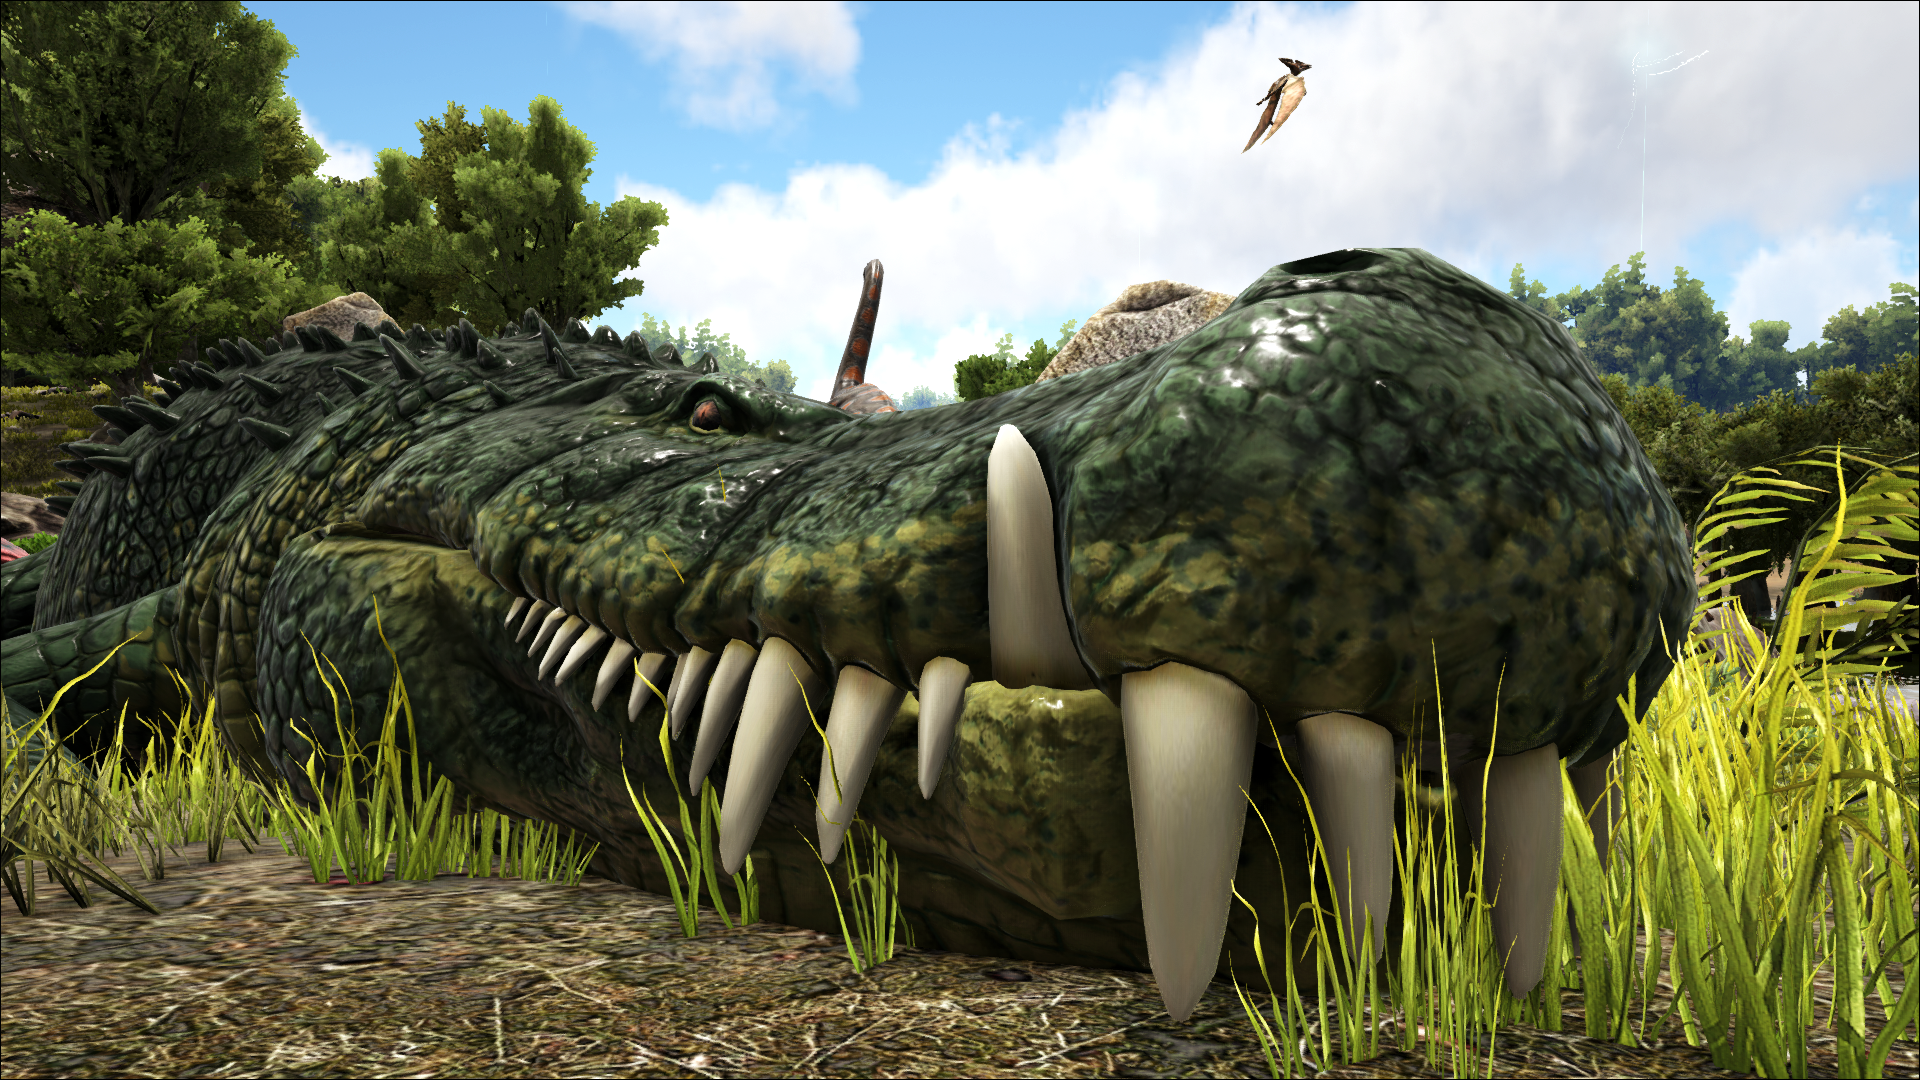 More ARK Survival Ascended Creatures and Dinosaurs - Deinosuchus